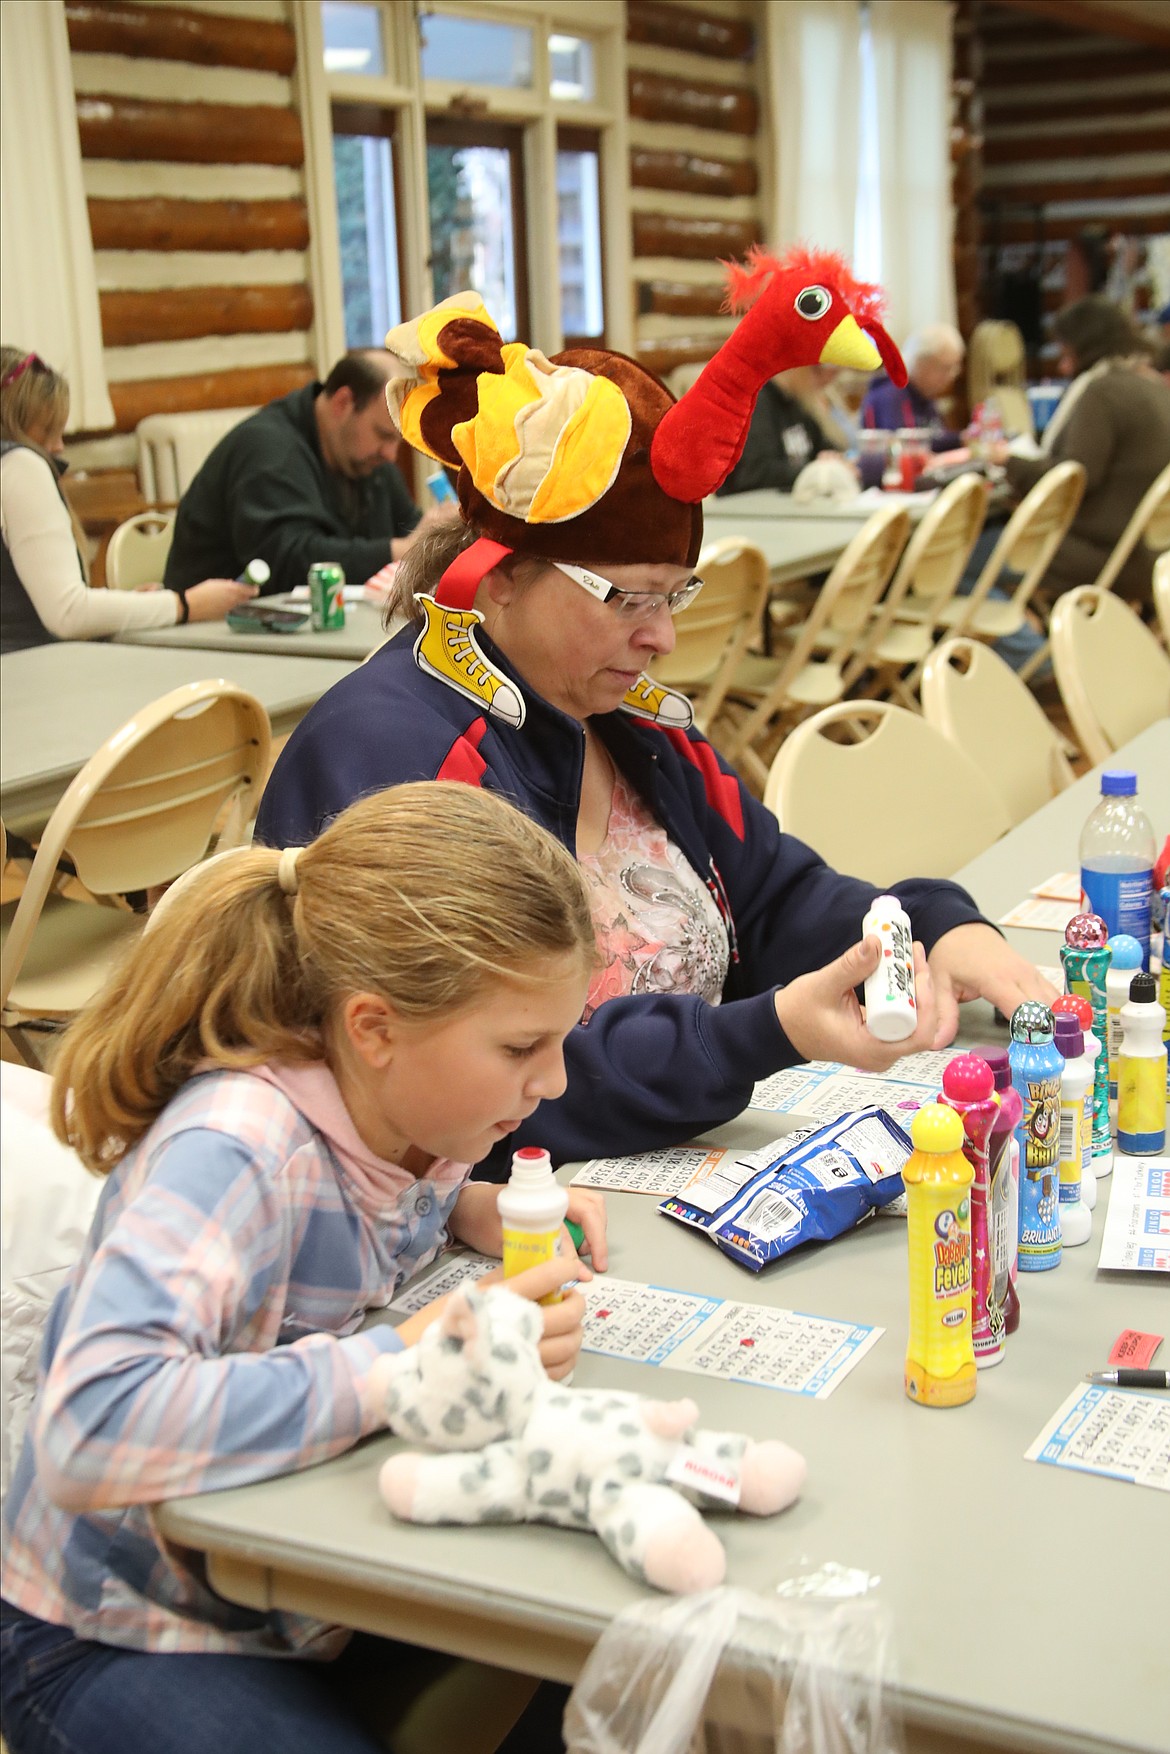 Khloe Schramm and Kathy Sauer checked to see if their bingo cards have the number called at the Sandpoint Lions' Turkey Bingo fundraiser on Saturday. The annual event is the traditional beginning of the Lions' annual Christmas drive, Toys for Tots.